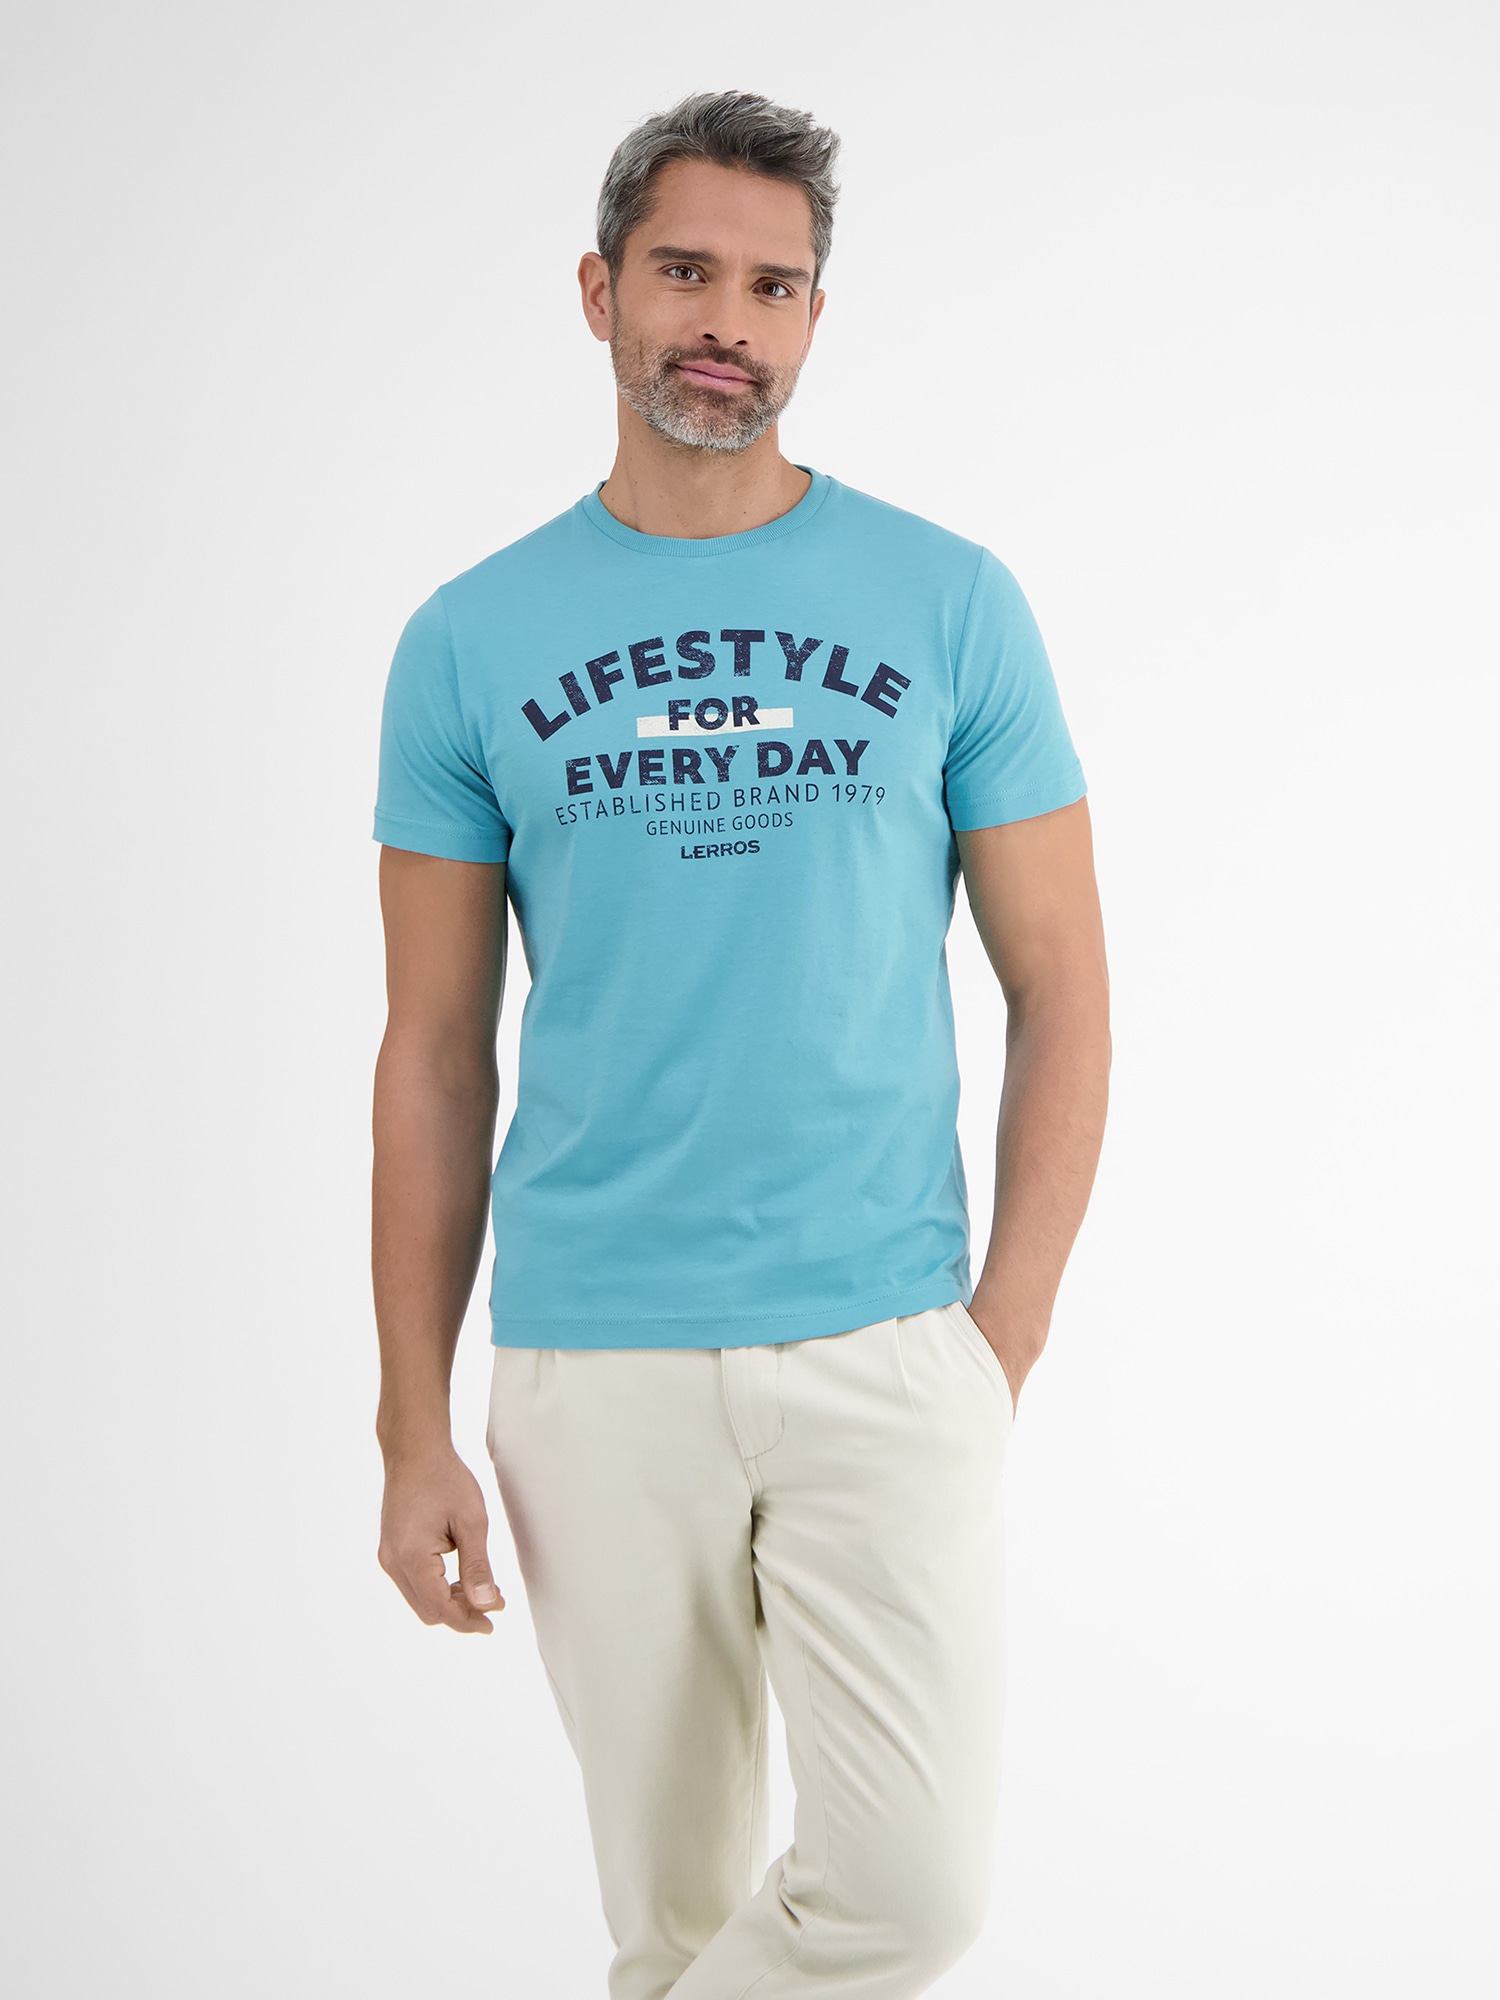 T-Shirt every »LERROS *Lifestyle ♕ for T-Shirt LERROS day*« bei